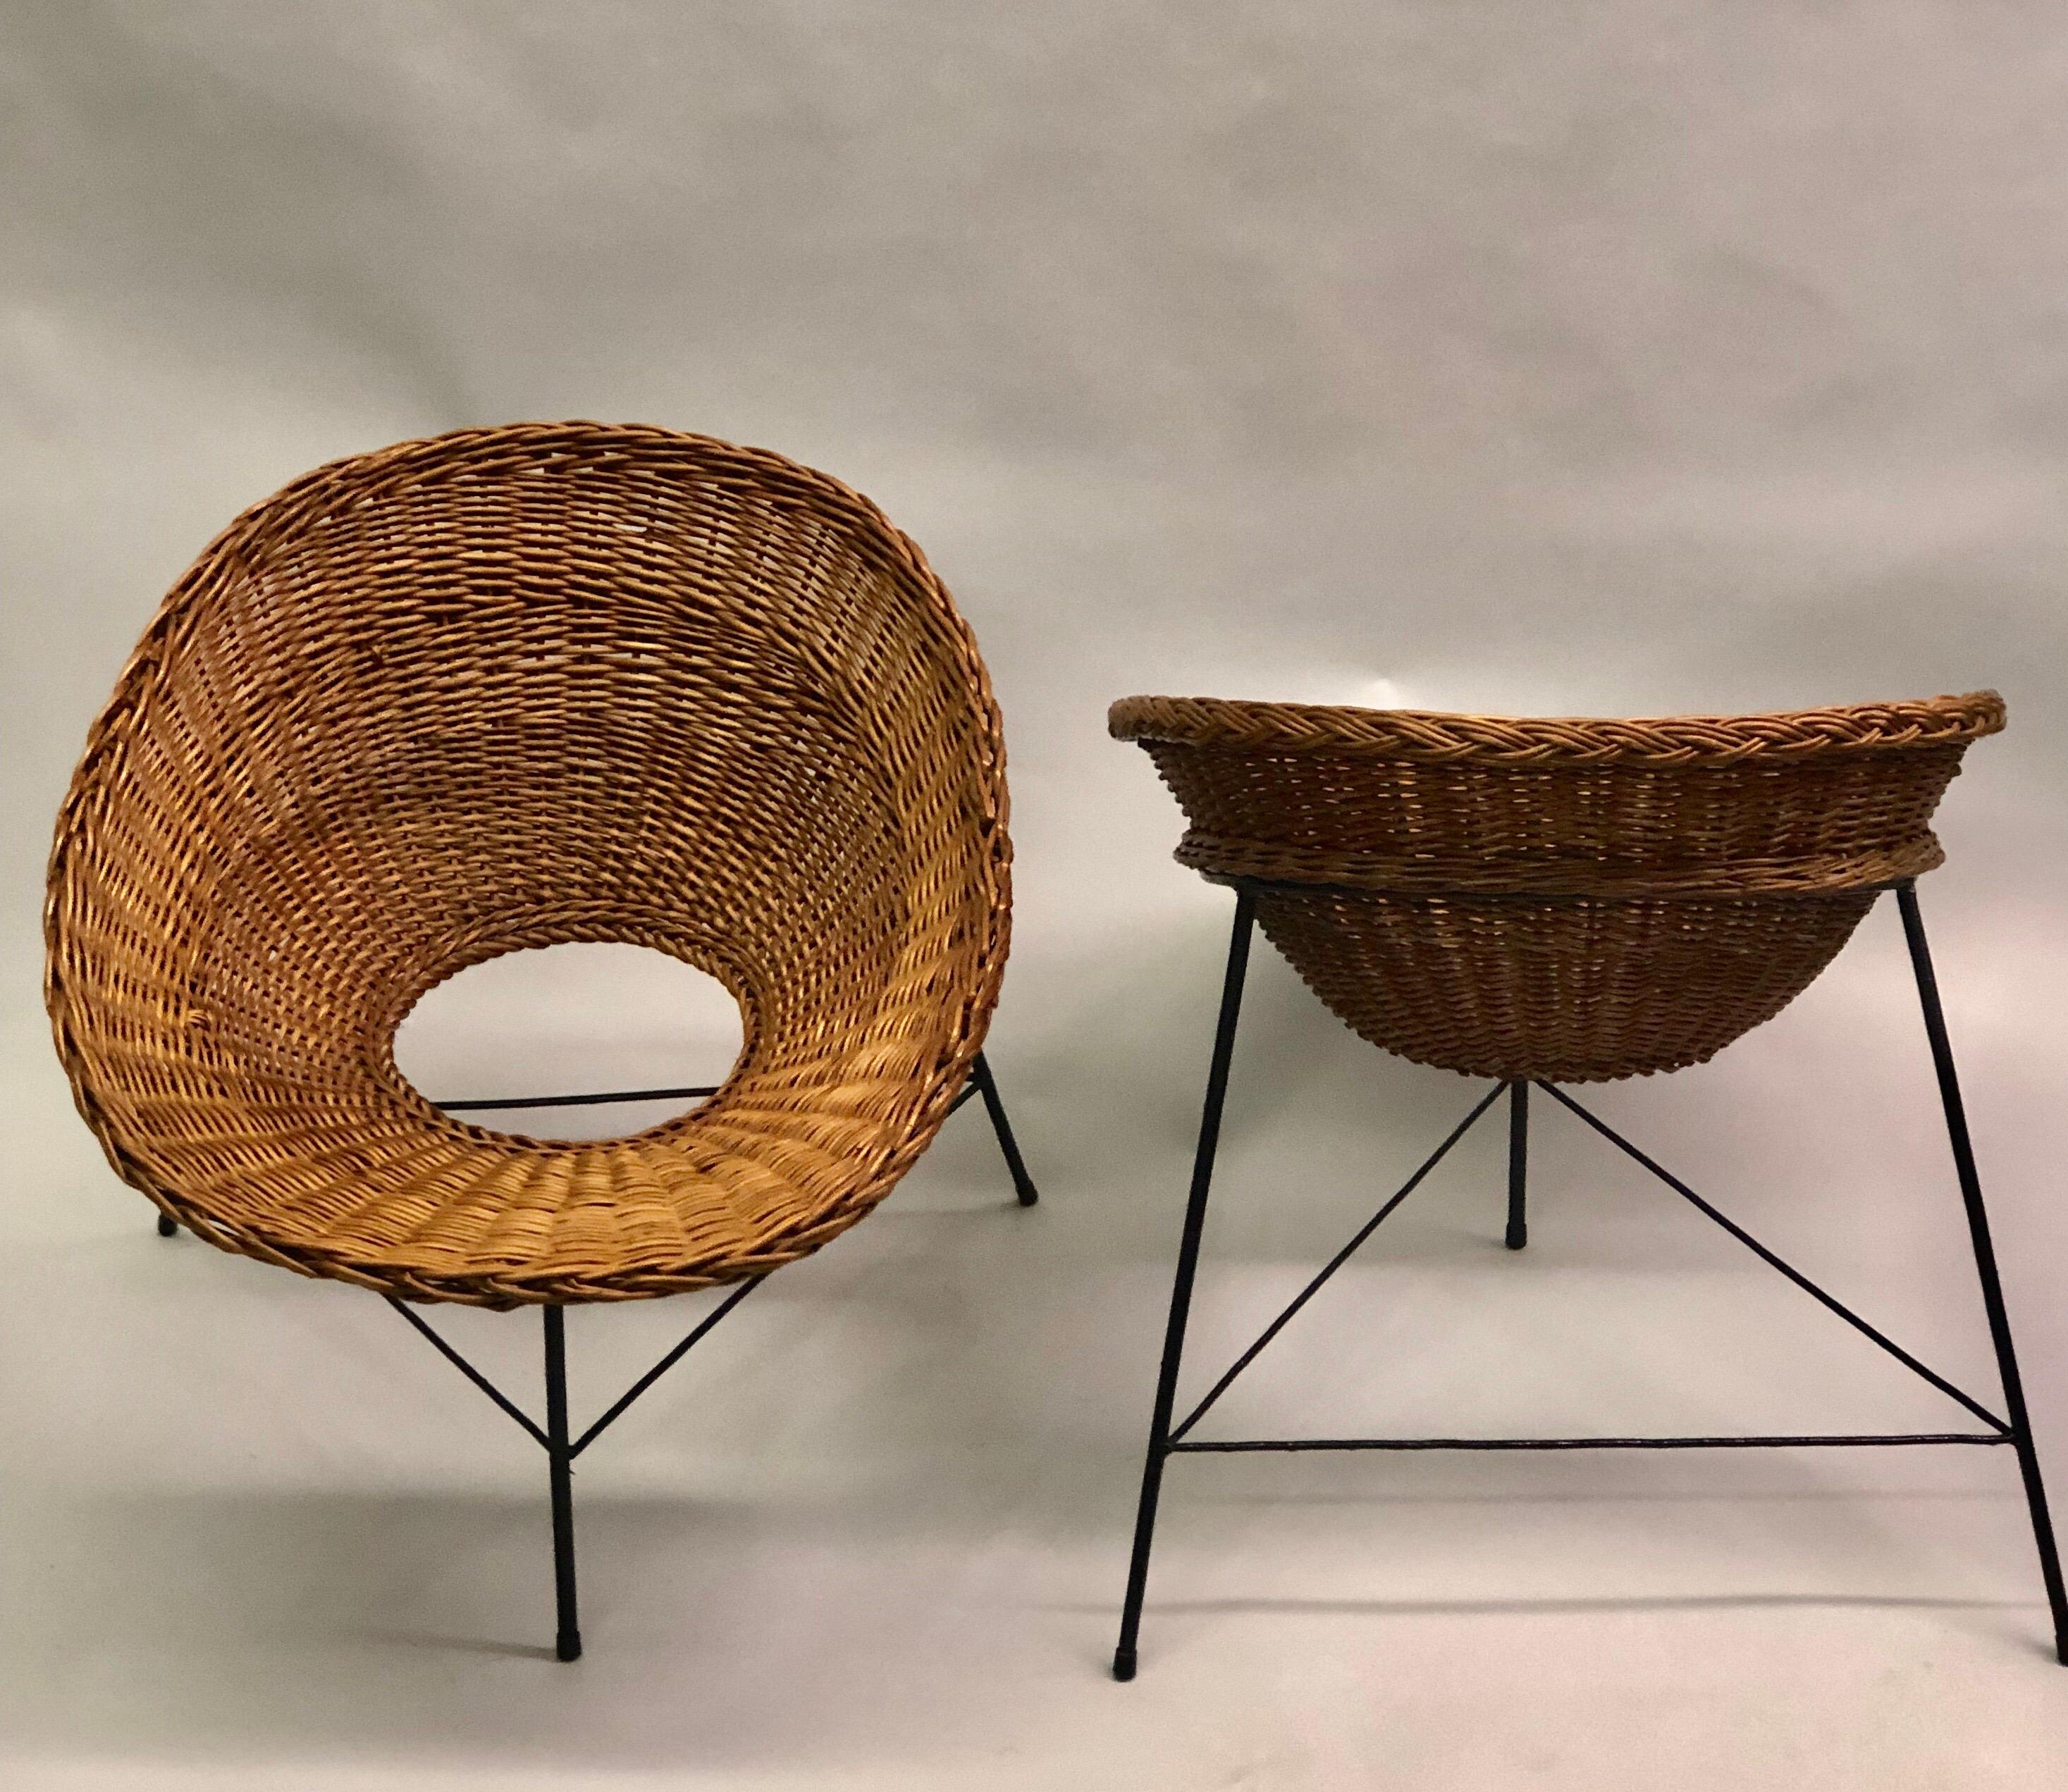 Elegant, stunning pair of Italian Mid-Century Modern cantilevered armchairs / lounge chairs attributed to Augusto Bozzi.  The pieces embody both Modernism and Craft. They are handmade and have an open and transparent aesthetic. The chairs have hand